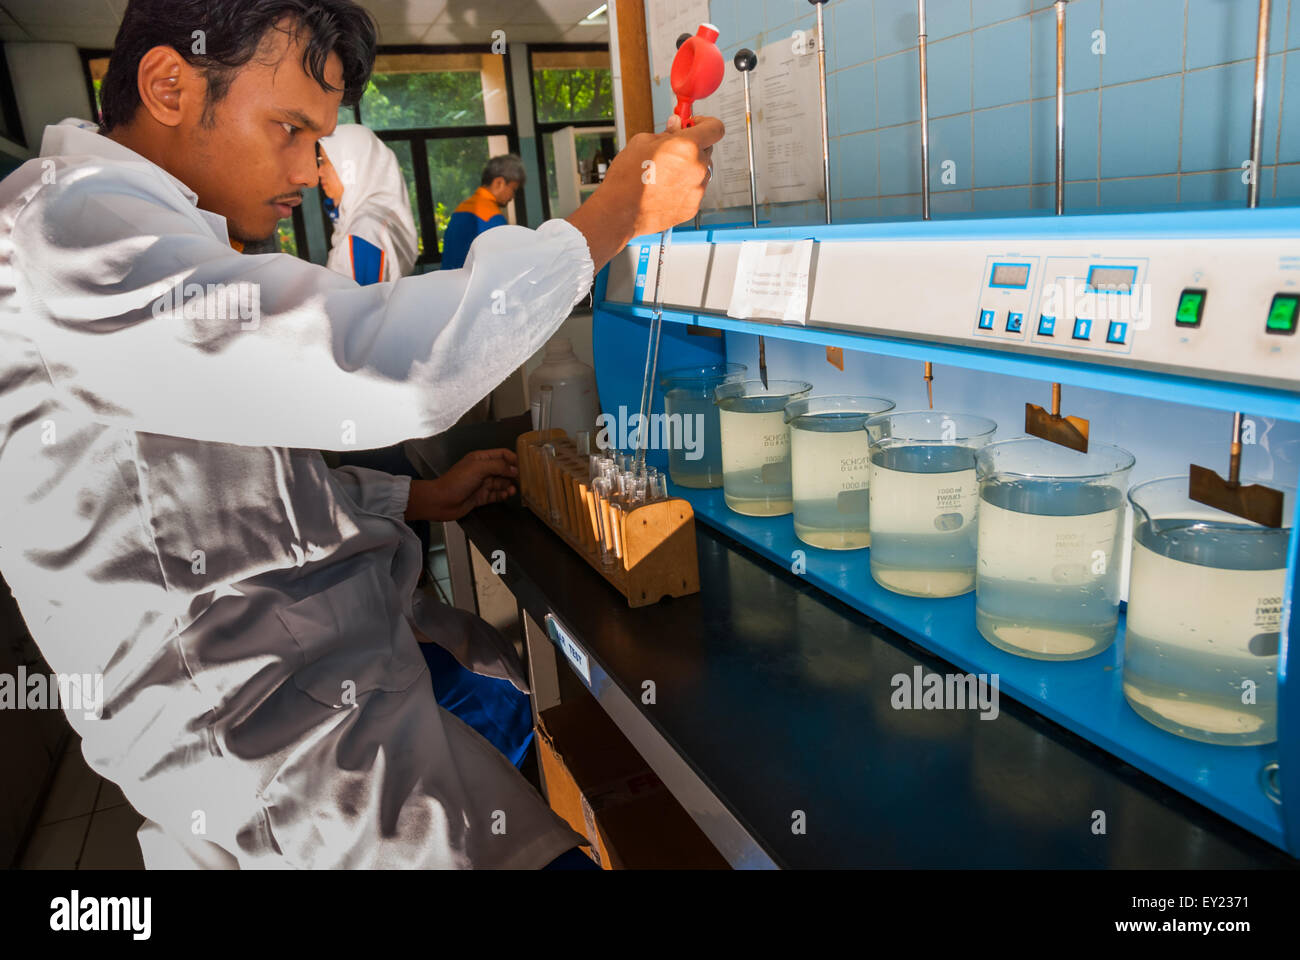 A scientist working on source water quality test lab operated by Aetra, one of Jakarta's water suppliers, in East Jakarta, Indonesia. Stock Photo